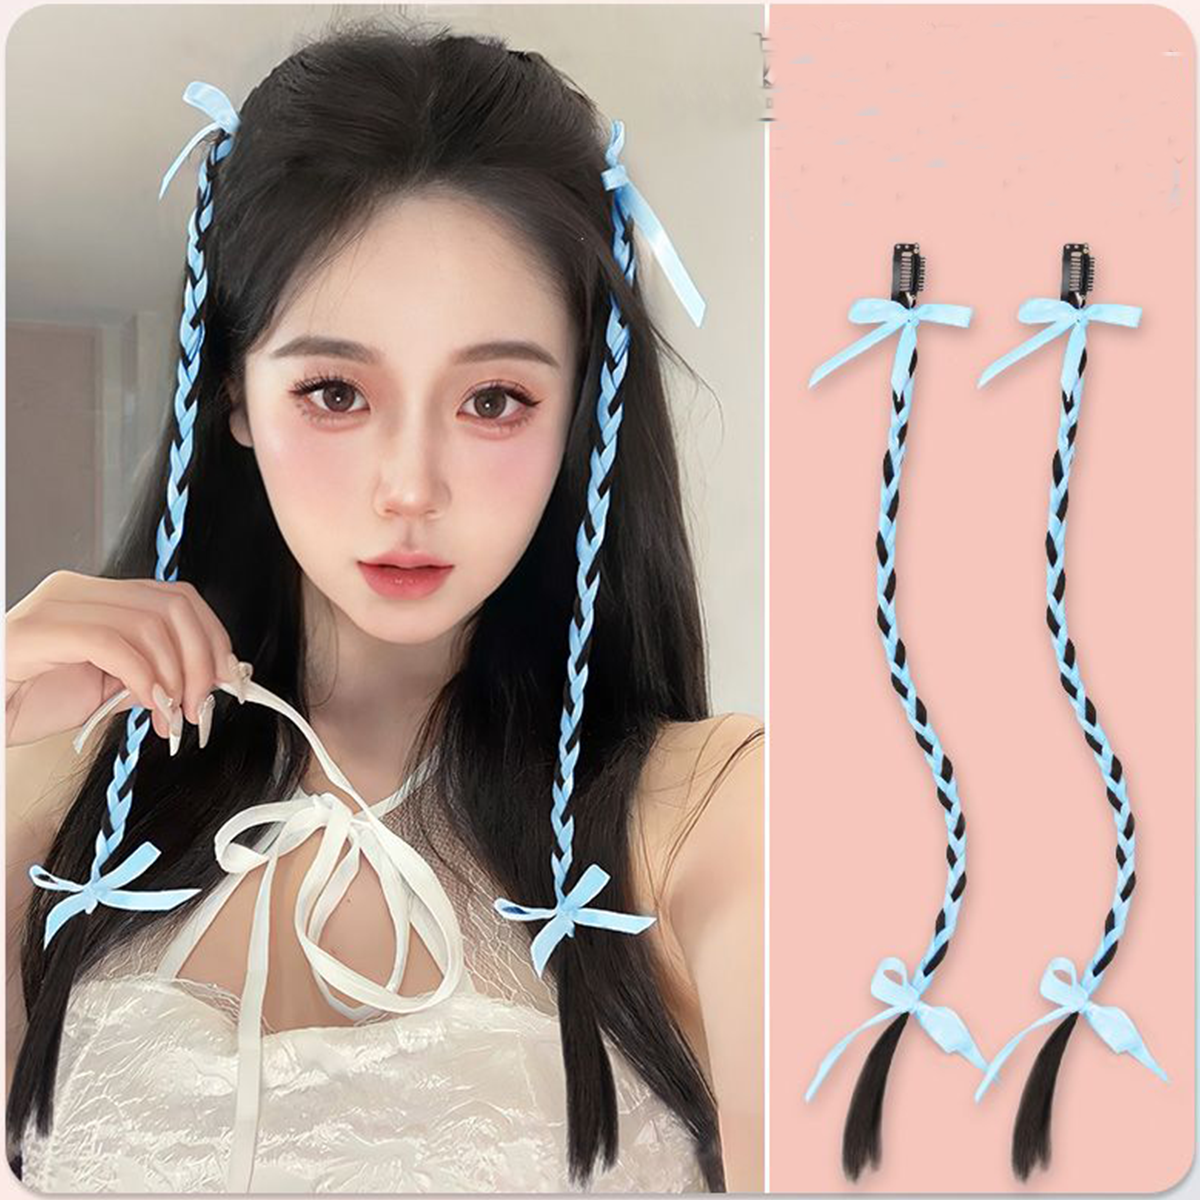 Wig Braid Simulation Hair Ribbon Tied Hair Sweet Cool Ballet Style Boxing Braid Bowknot Double Ponytail - Jam Garden